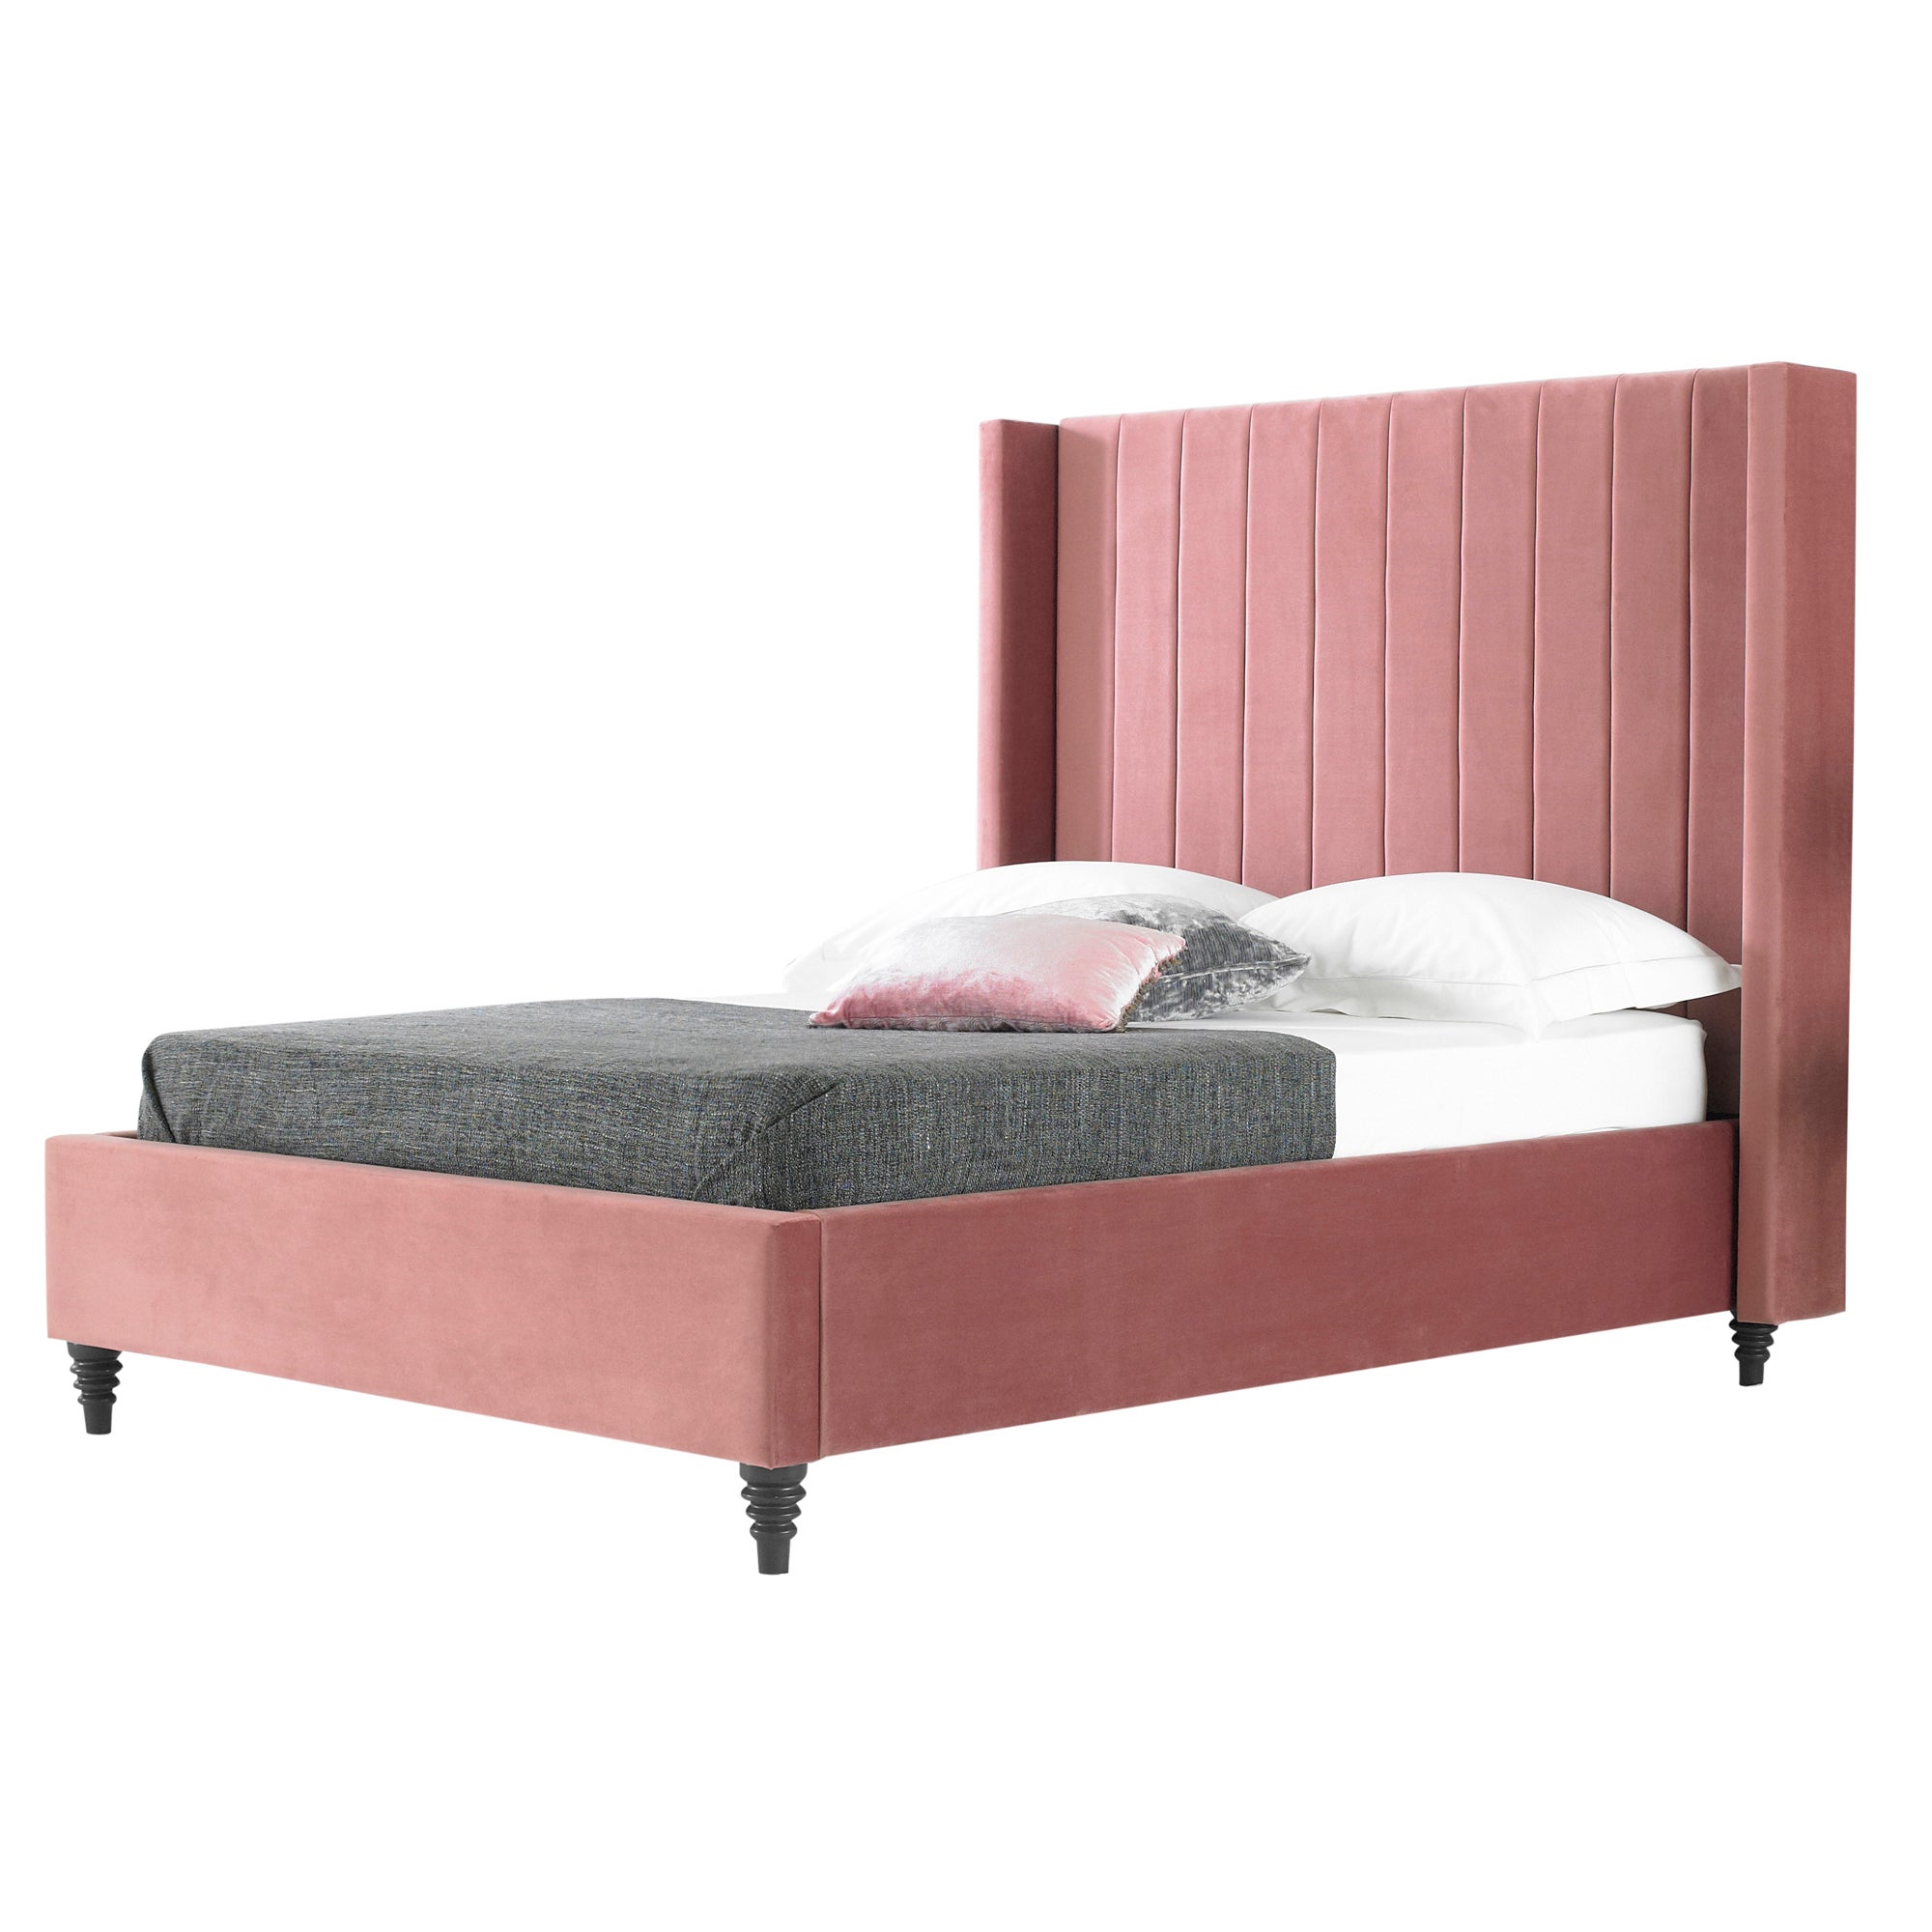 Turin Contemporary Blush Bed Frame Pink Blush